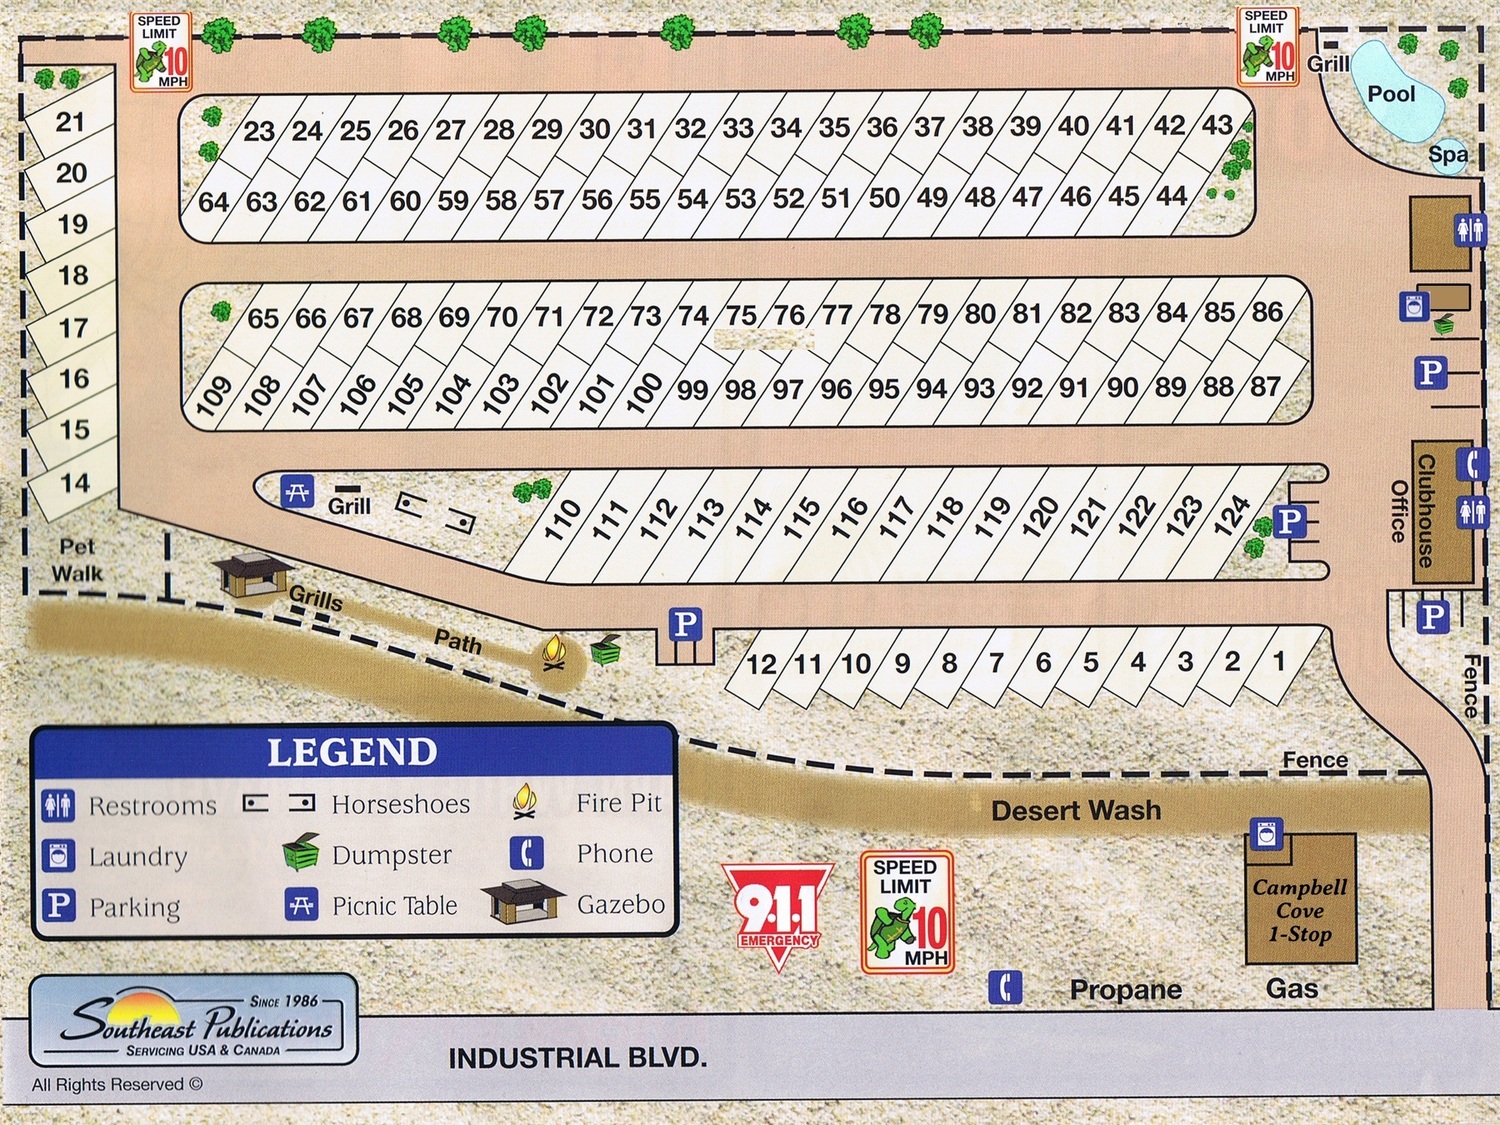 Campbell Cove RV Resort Property Map